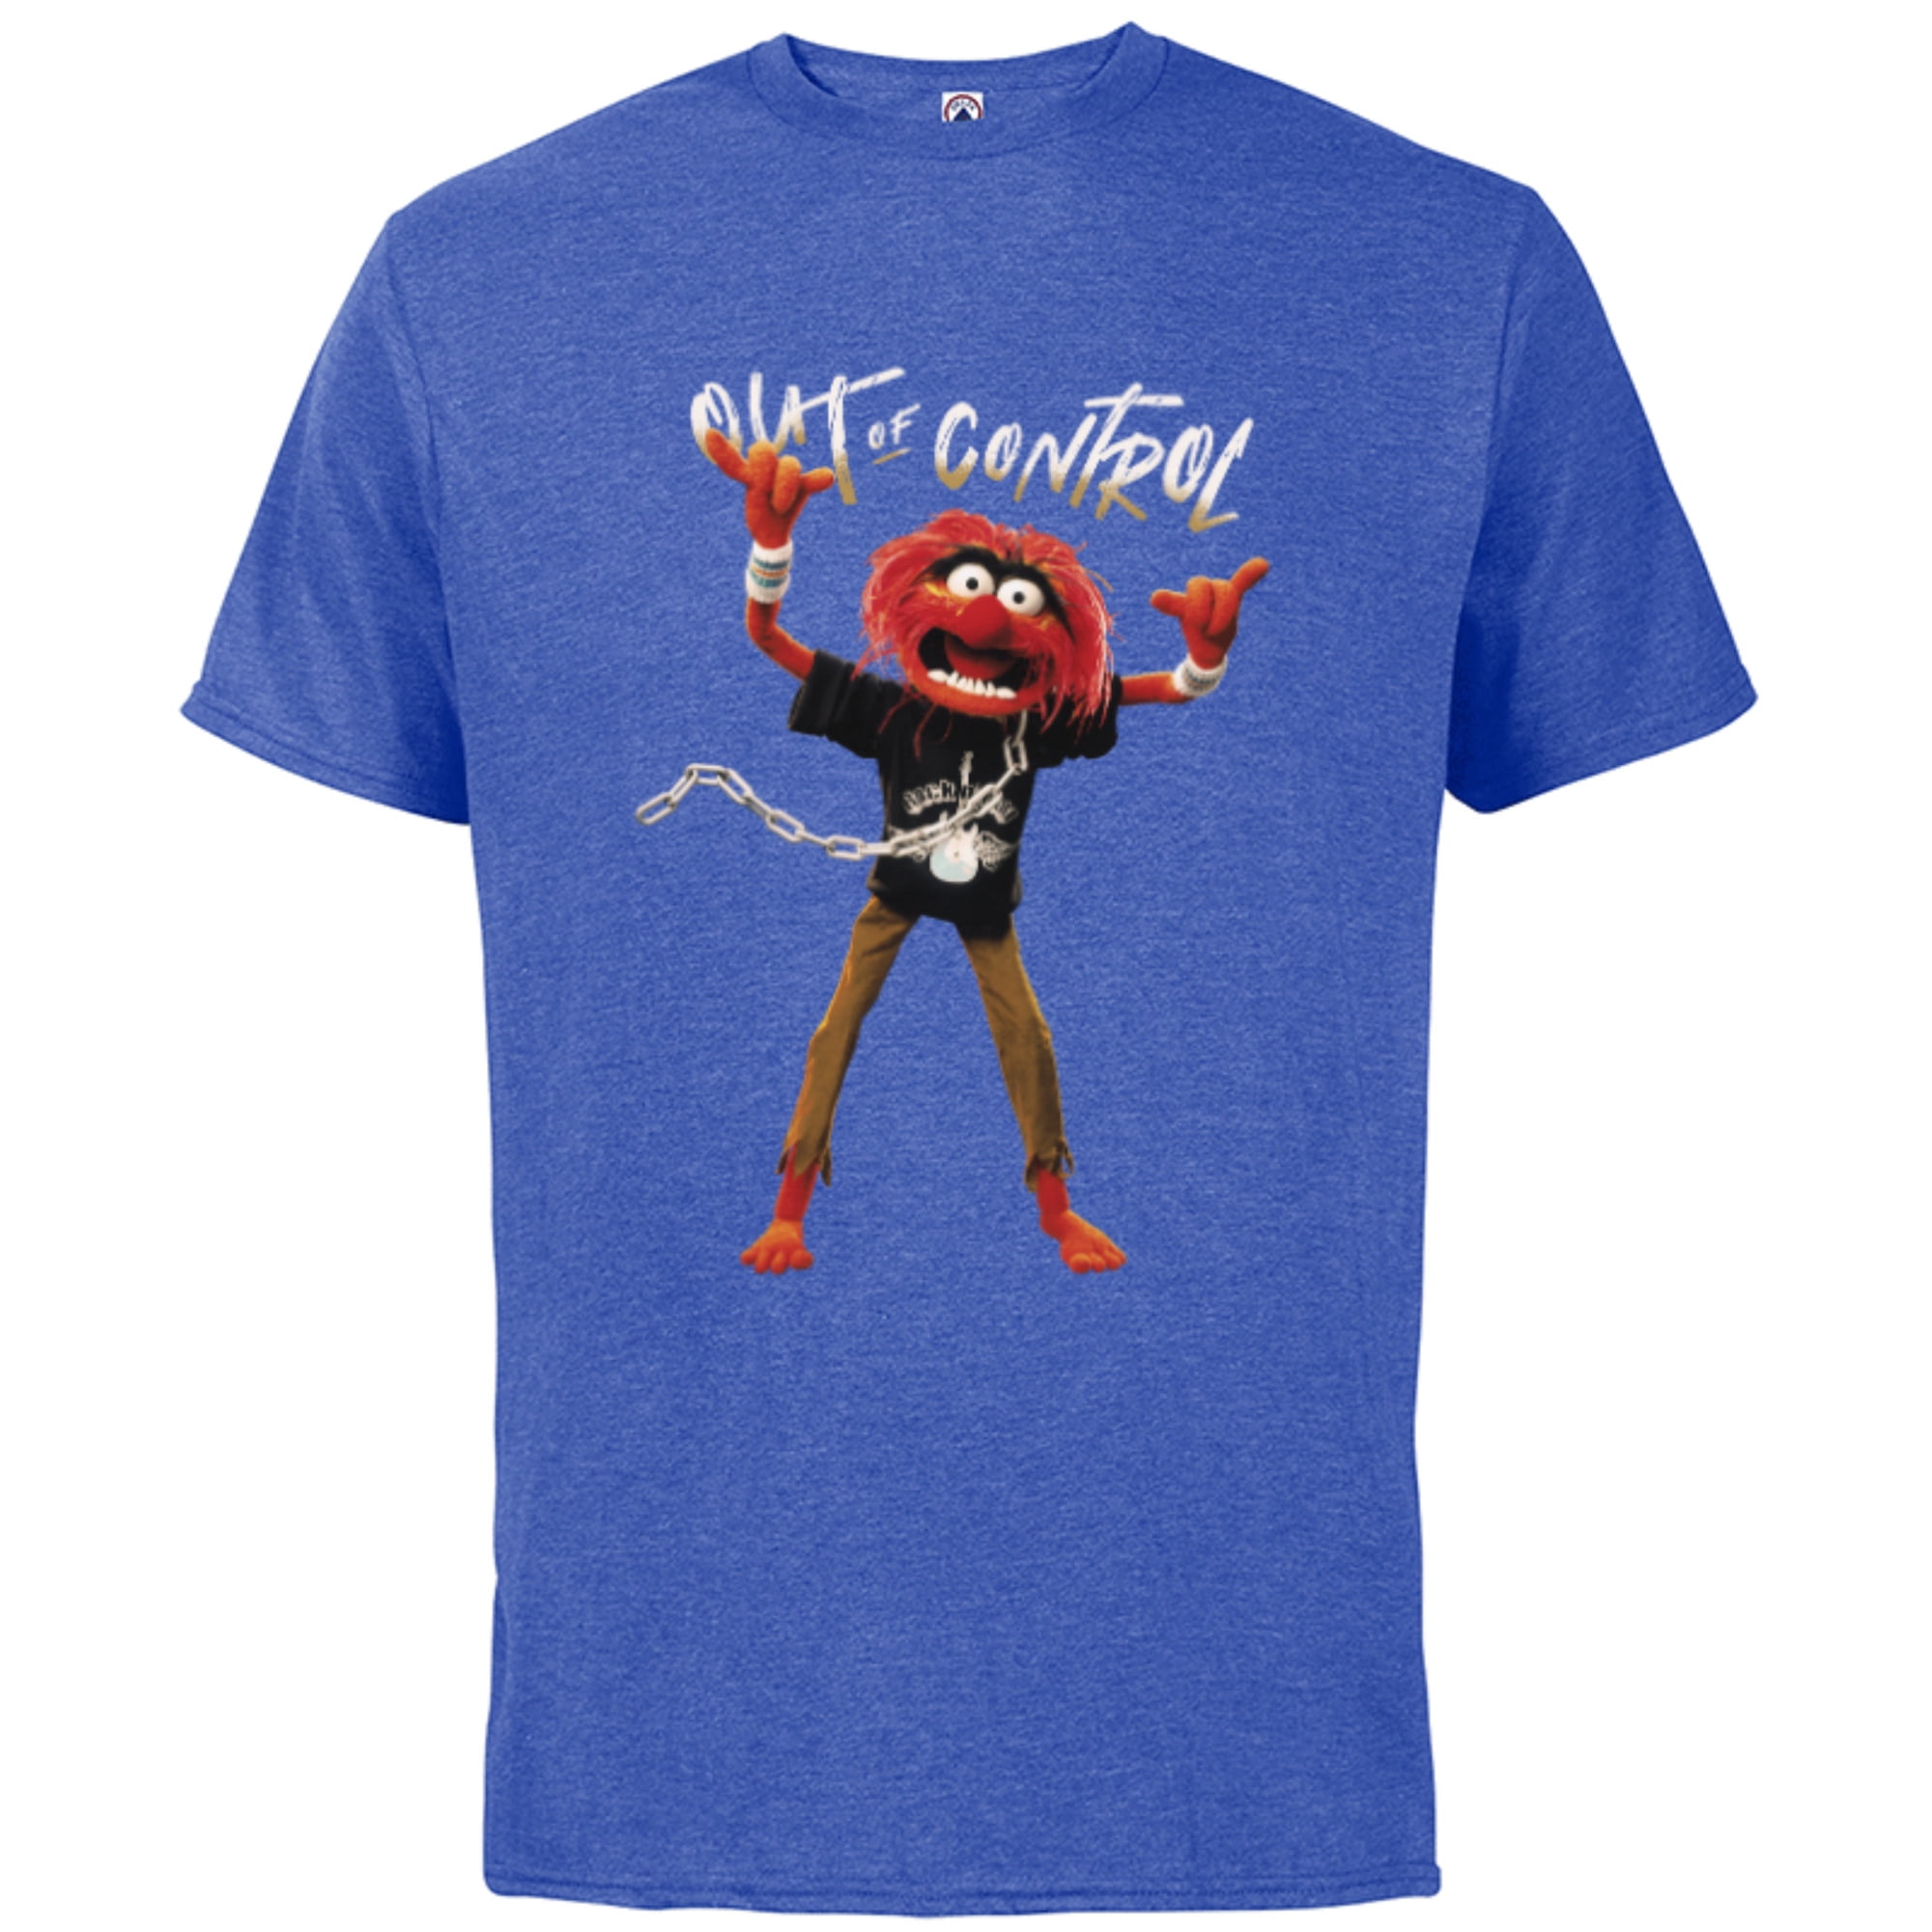 Navy - of Cotton for Out Customized-Athletic Animal Short Sleeve Muppets T-Shirt Control Disney Adults- The